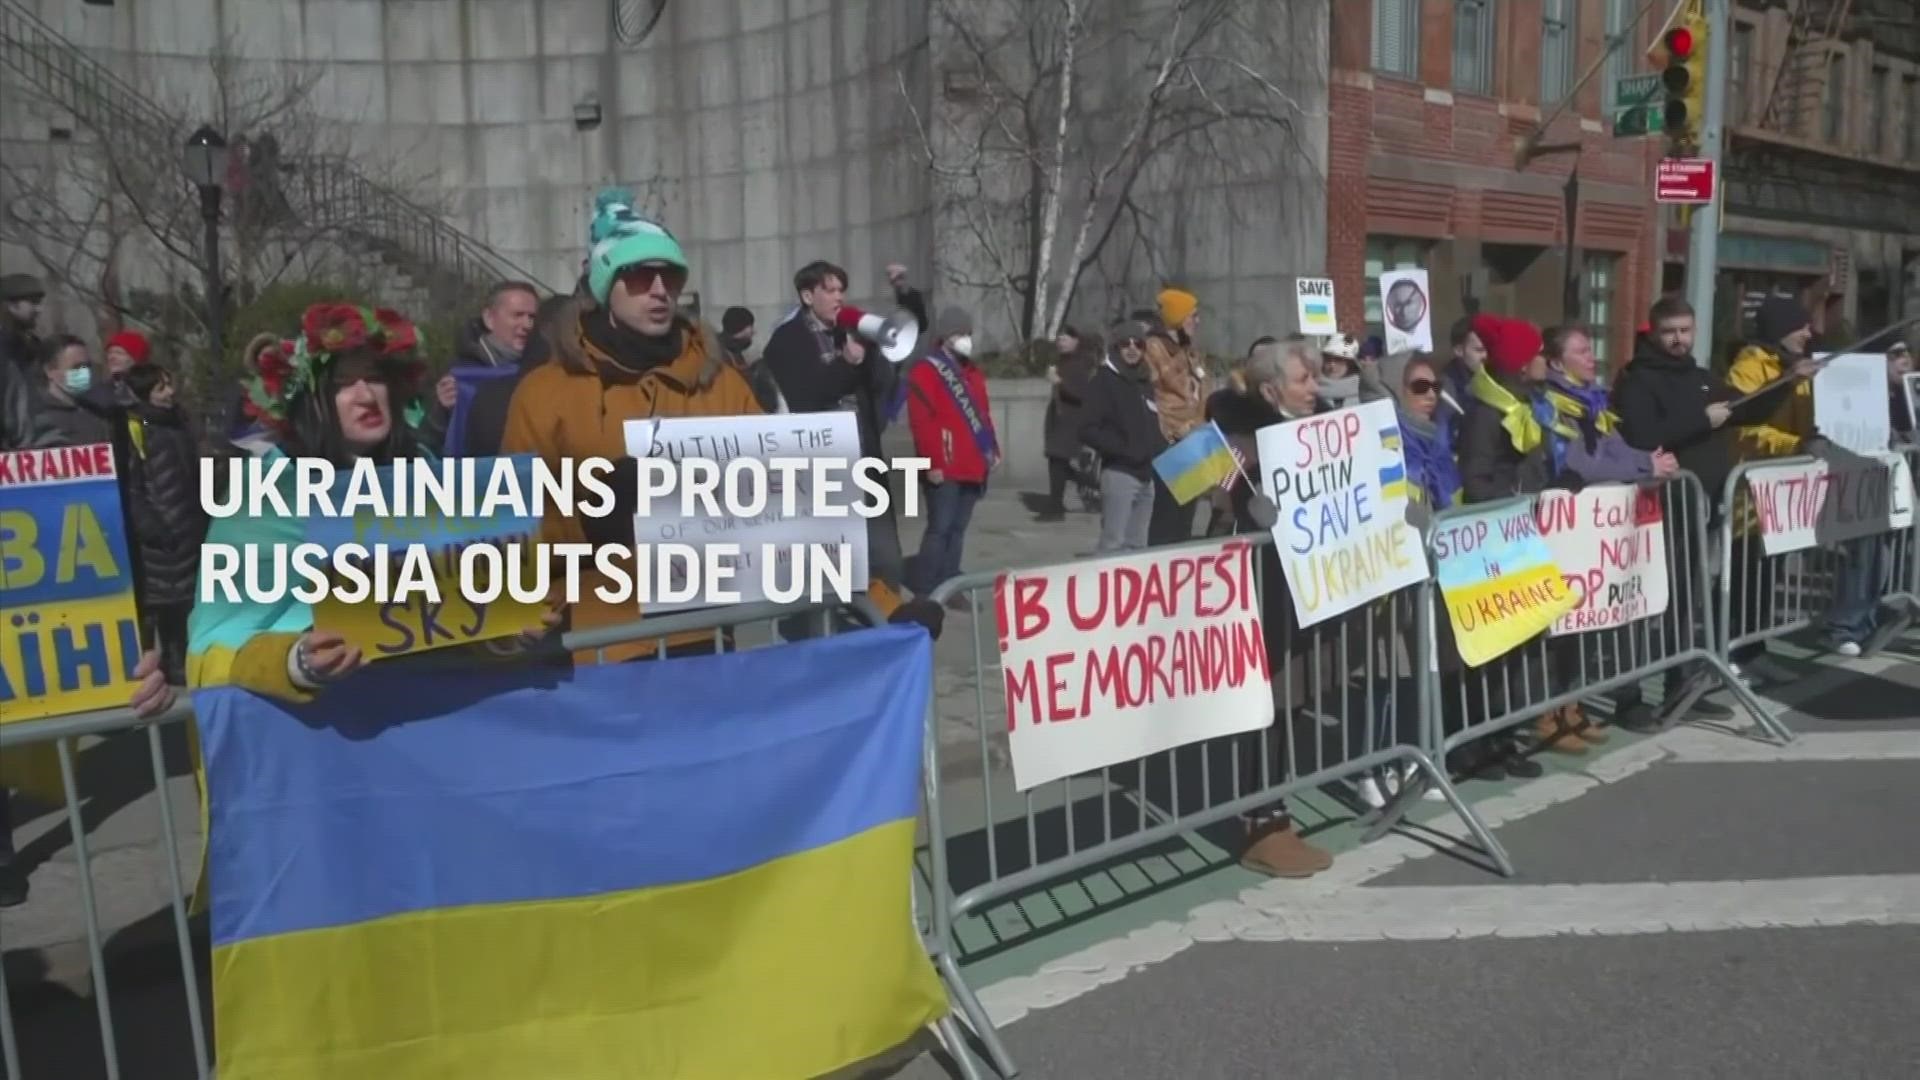 Protestors outside the UN headquarters in New York demand that the organization take action against Russia, with some calling for the country's expulsion.